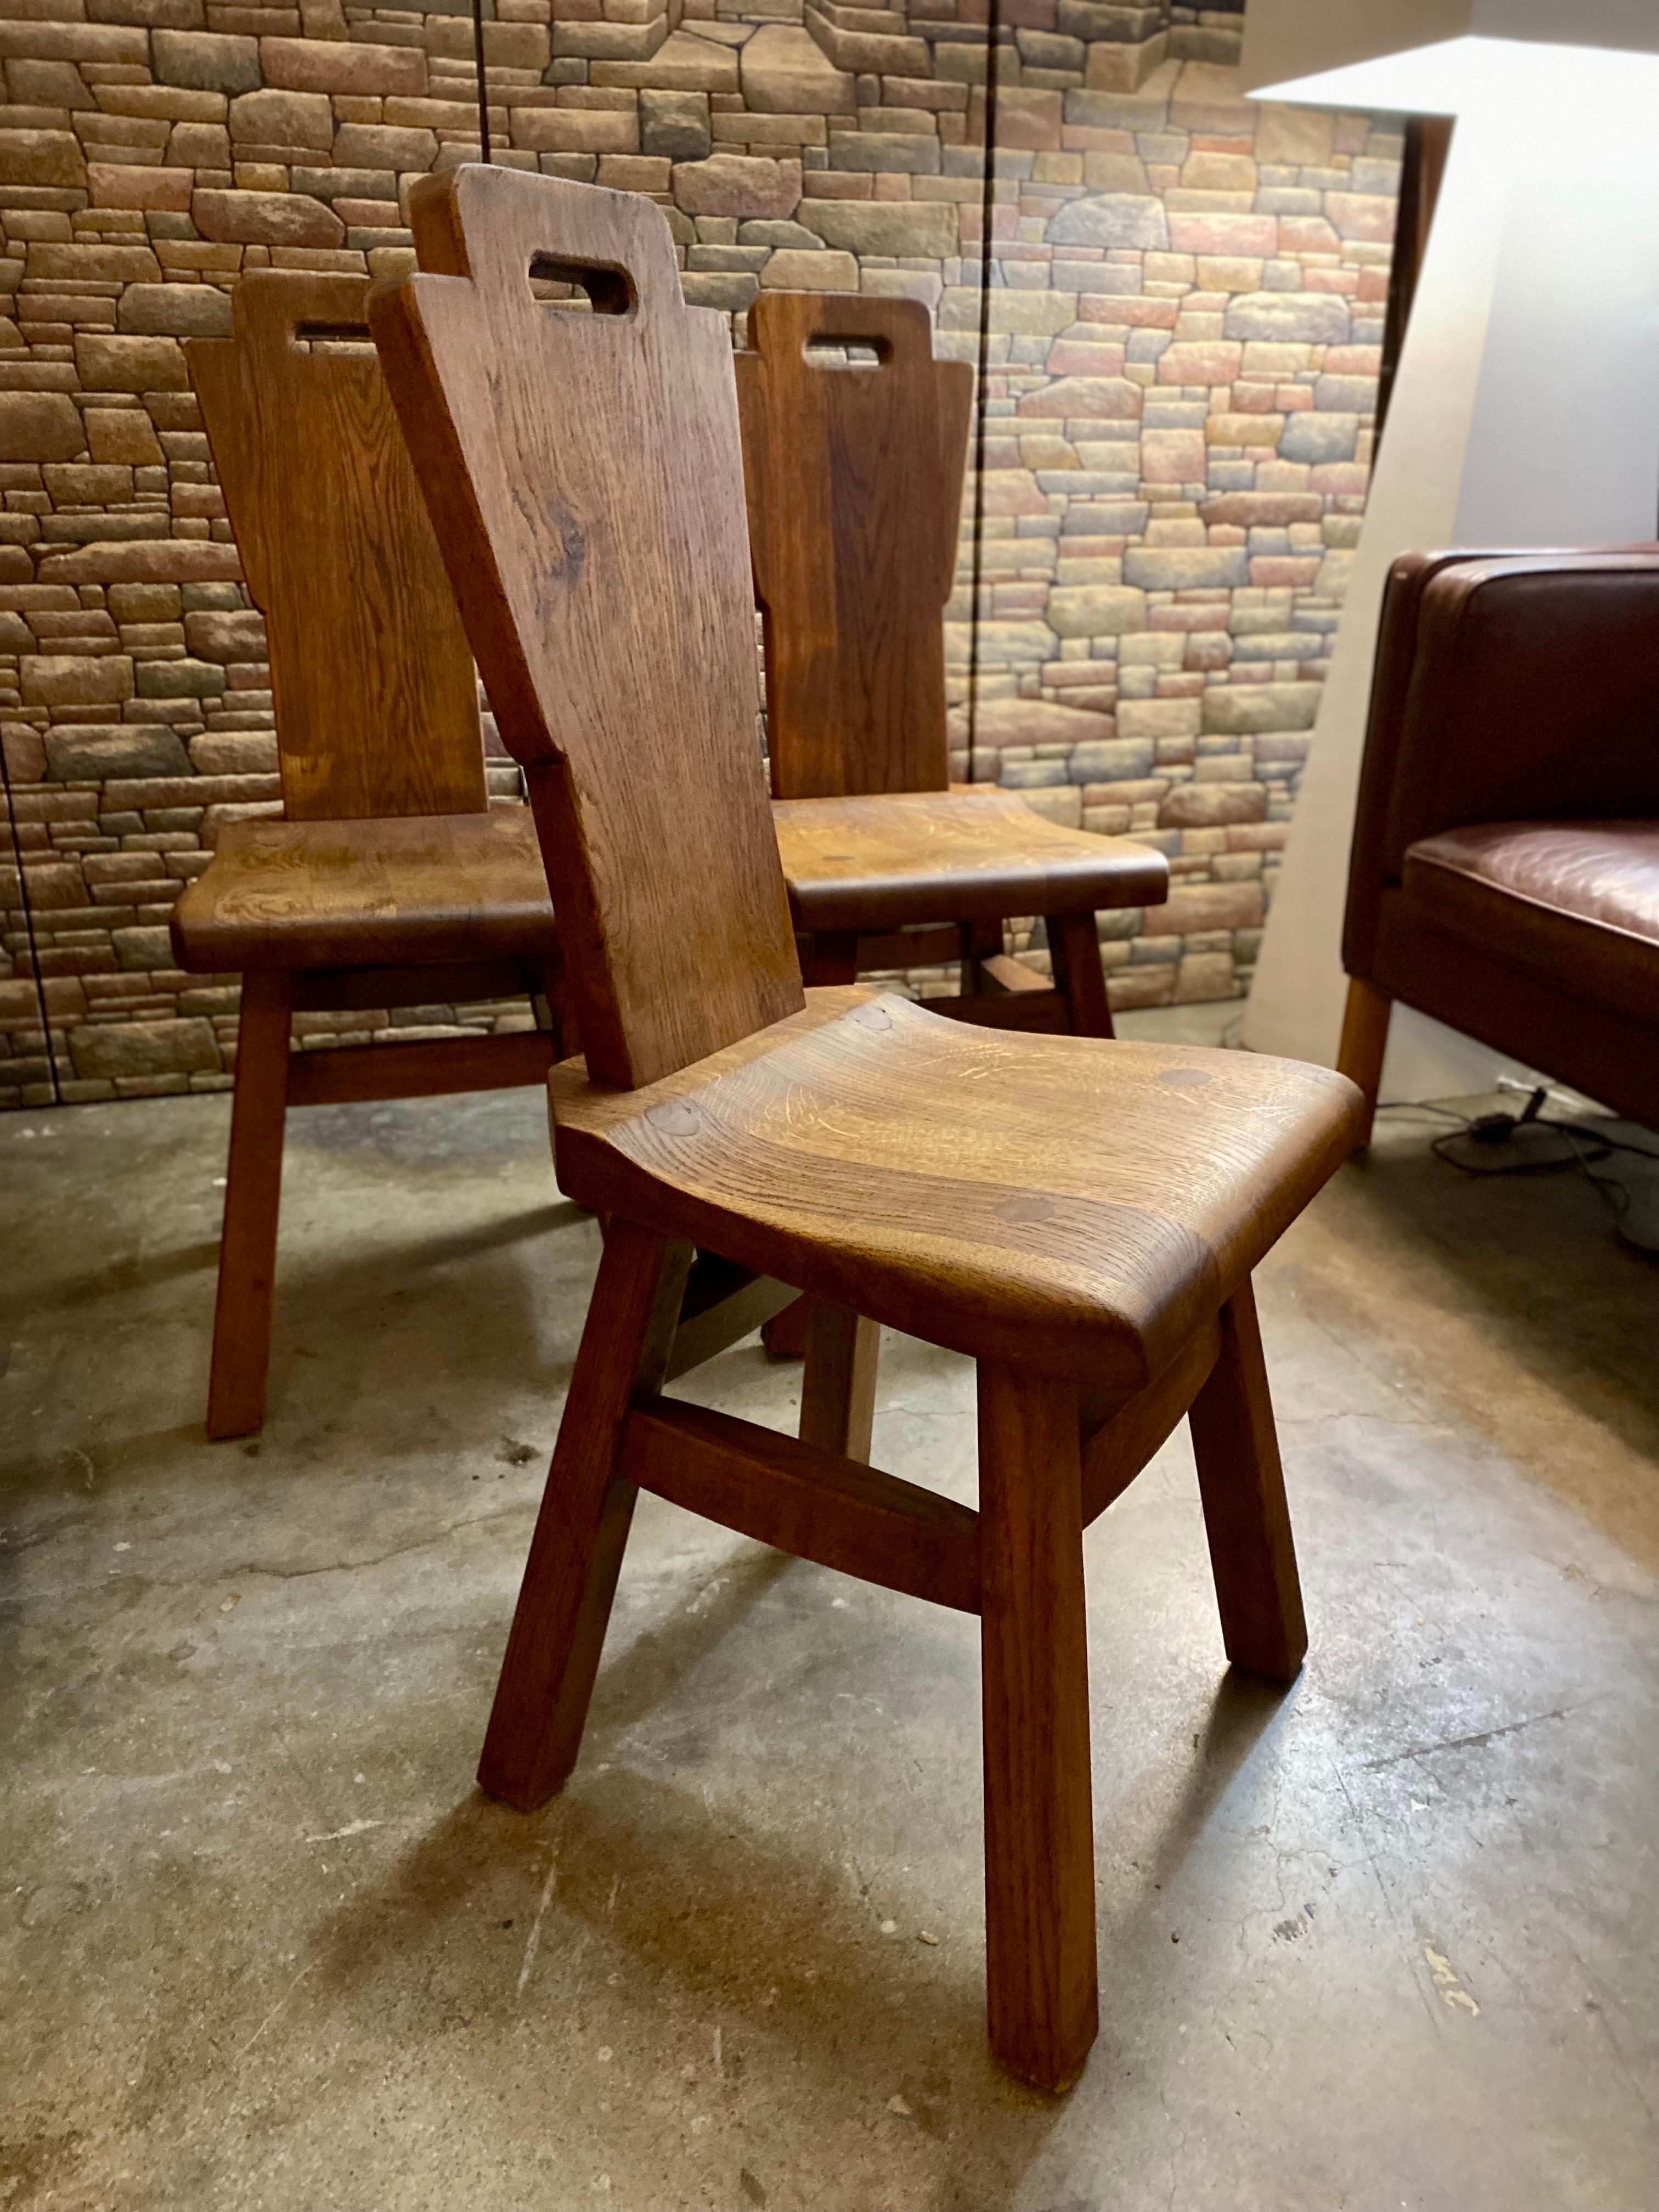 Set of 4 Brutalist Oak Dining Chairs, Netherlands, Circa 1970s For Sale 2